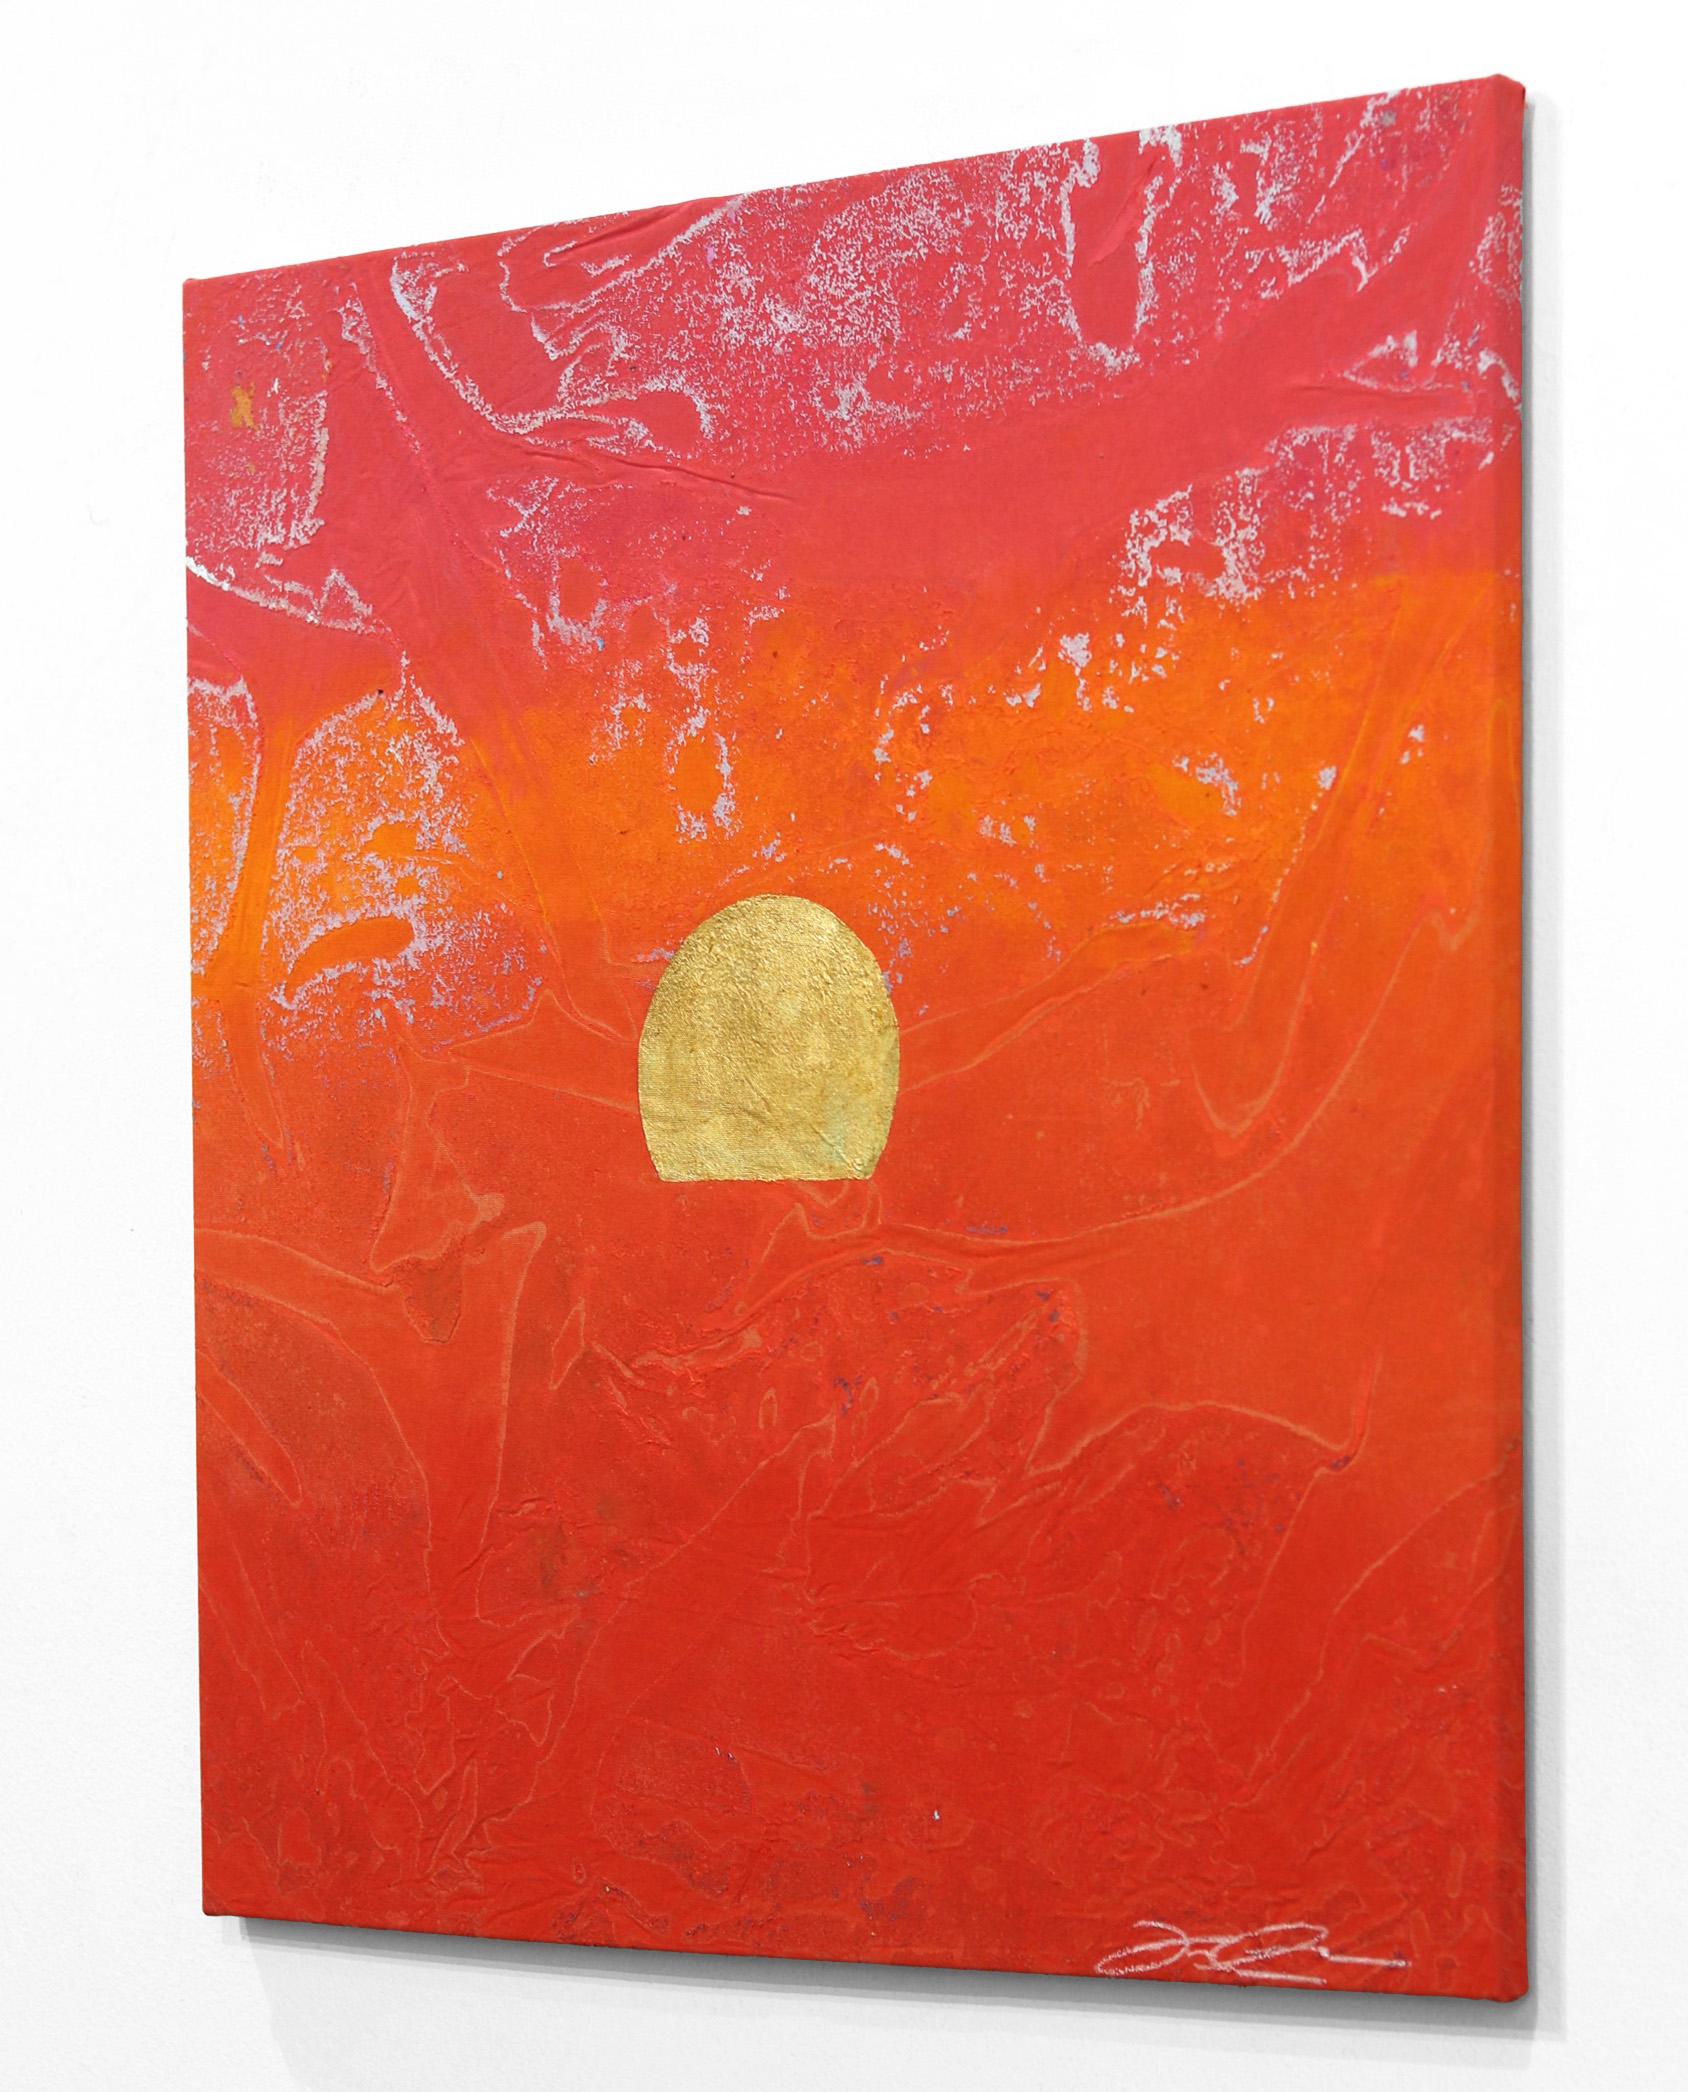 Concrete Sunset 2 - Bold Meditative Gold Leaf Red Painting on Linen Canvas For Sale 1